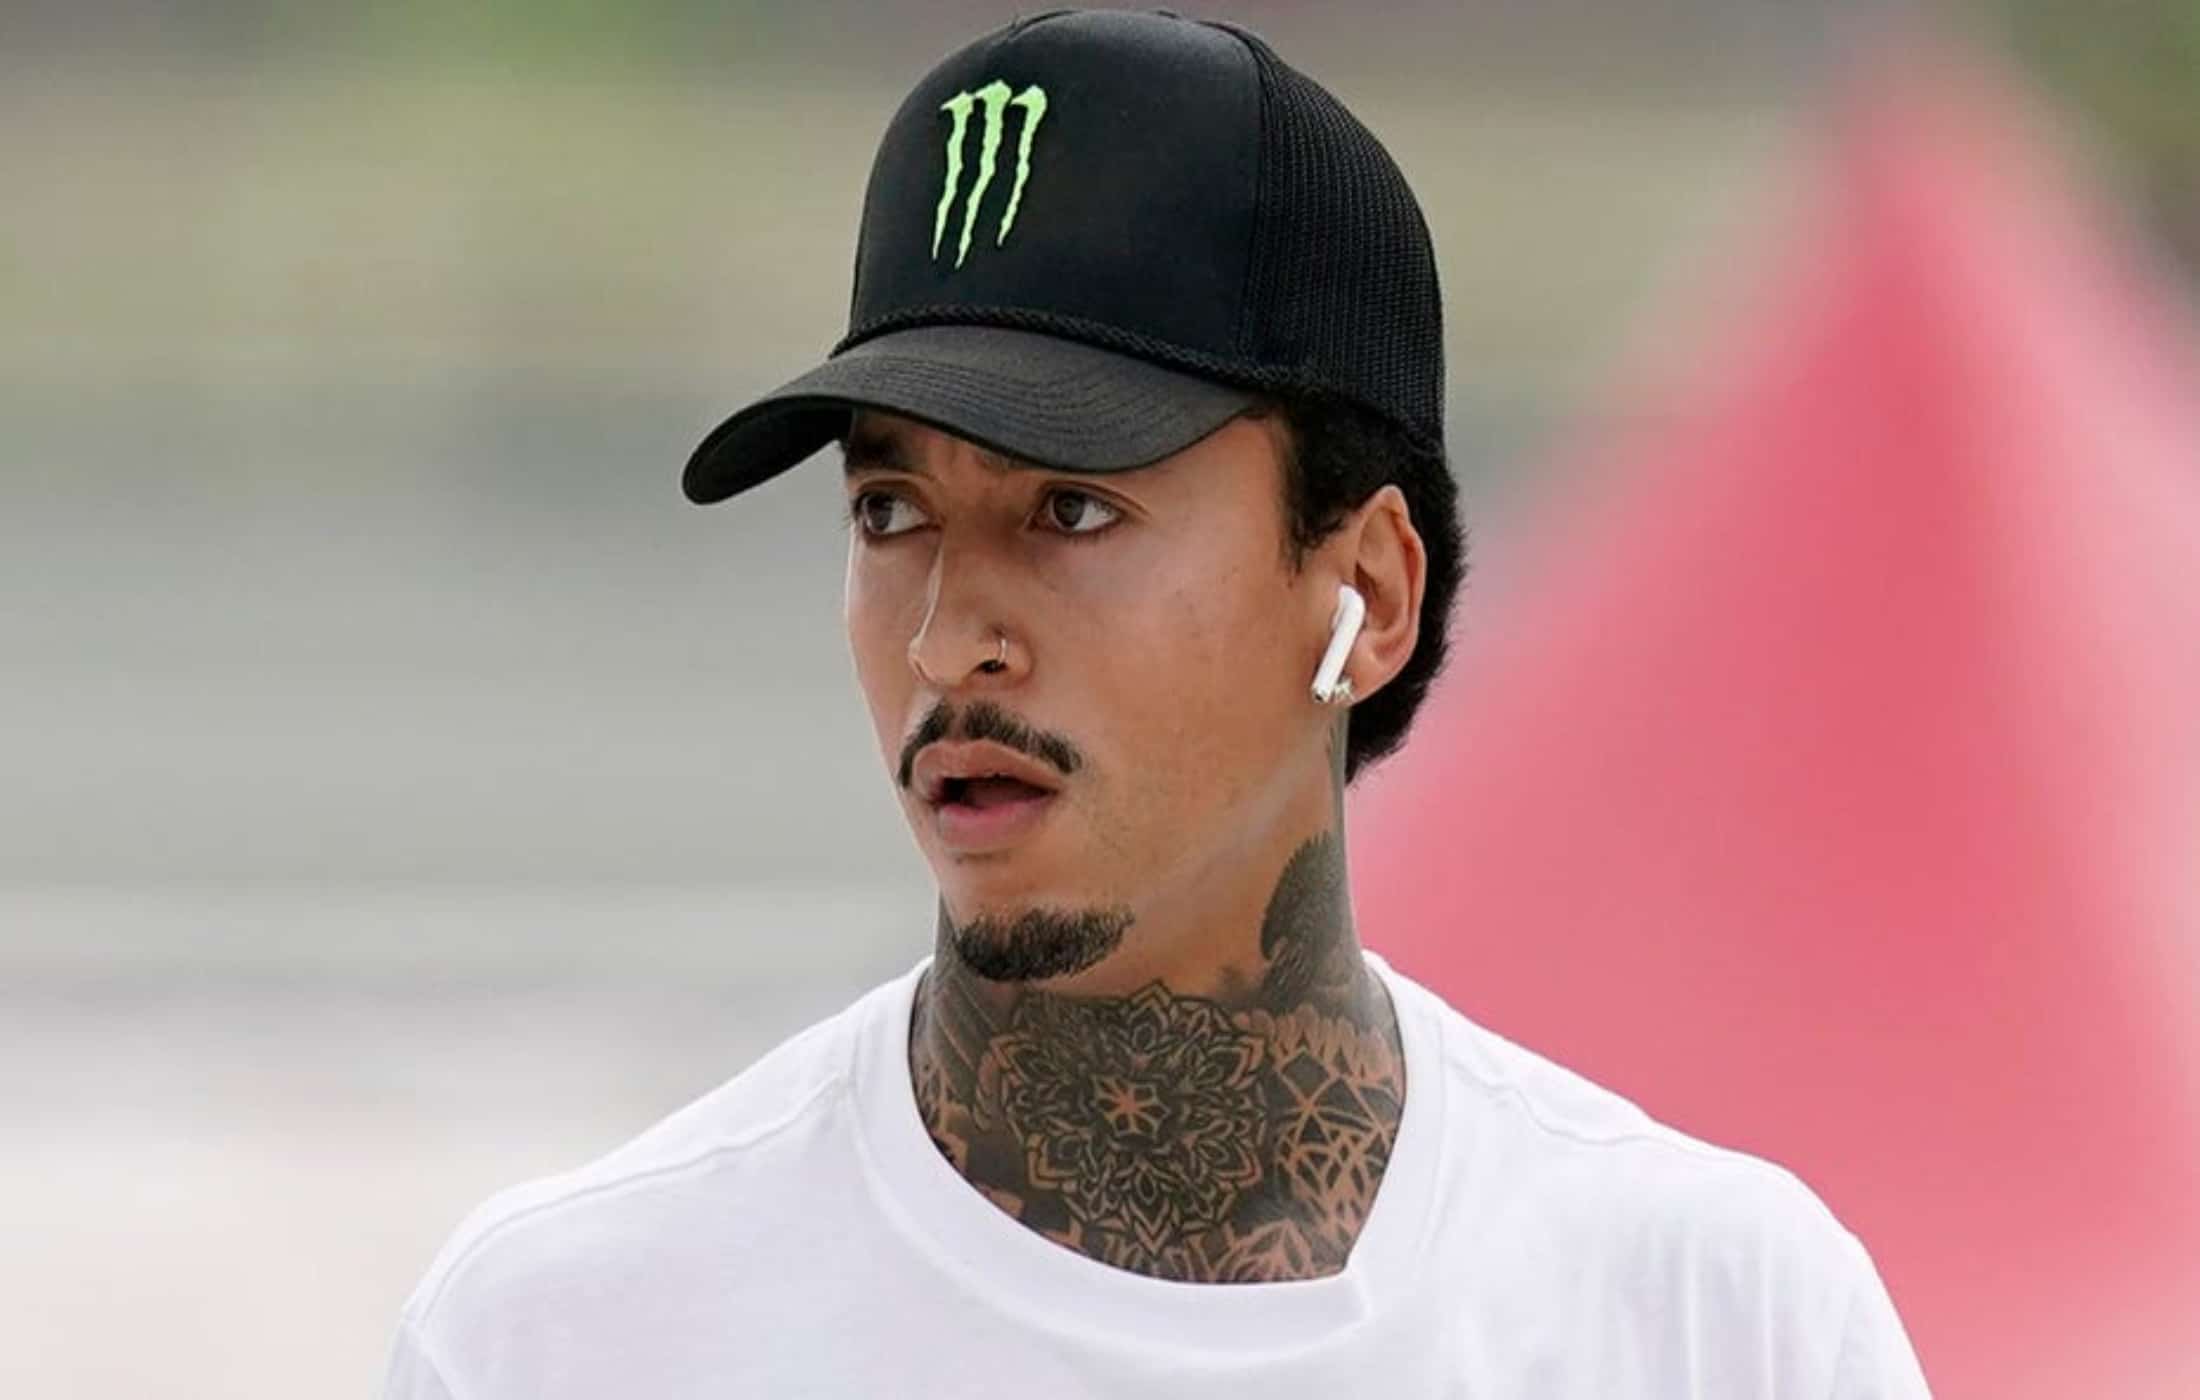 Nyjah Huston net worth, age, wiki, family, biography and latest updates